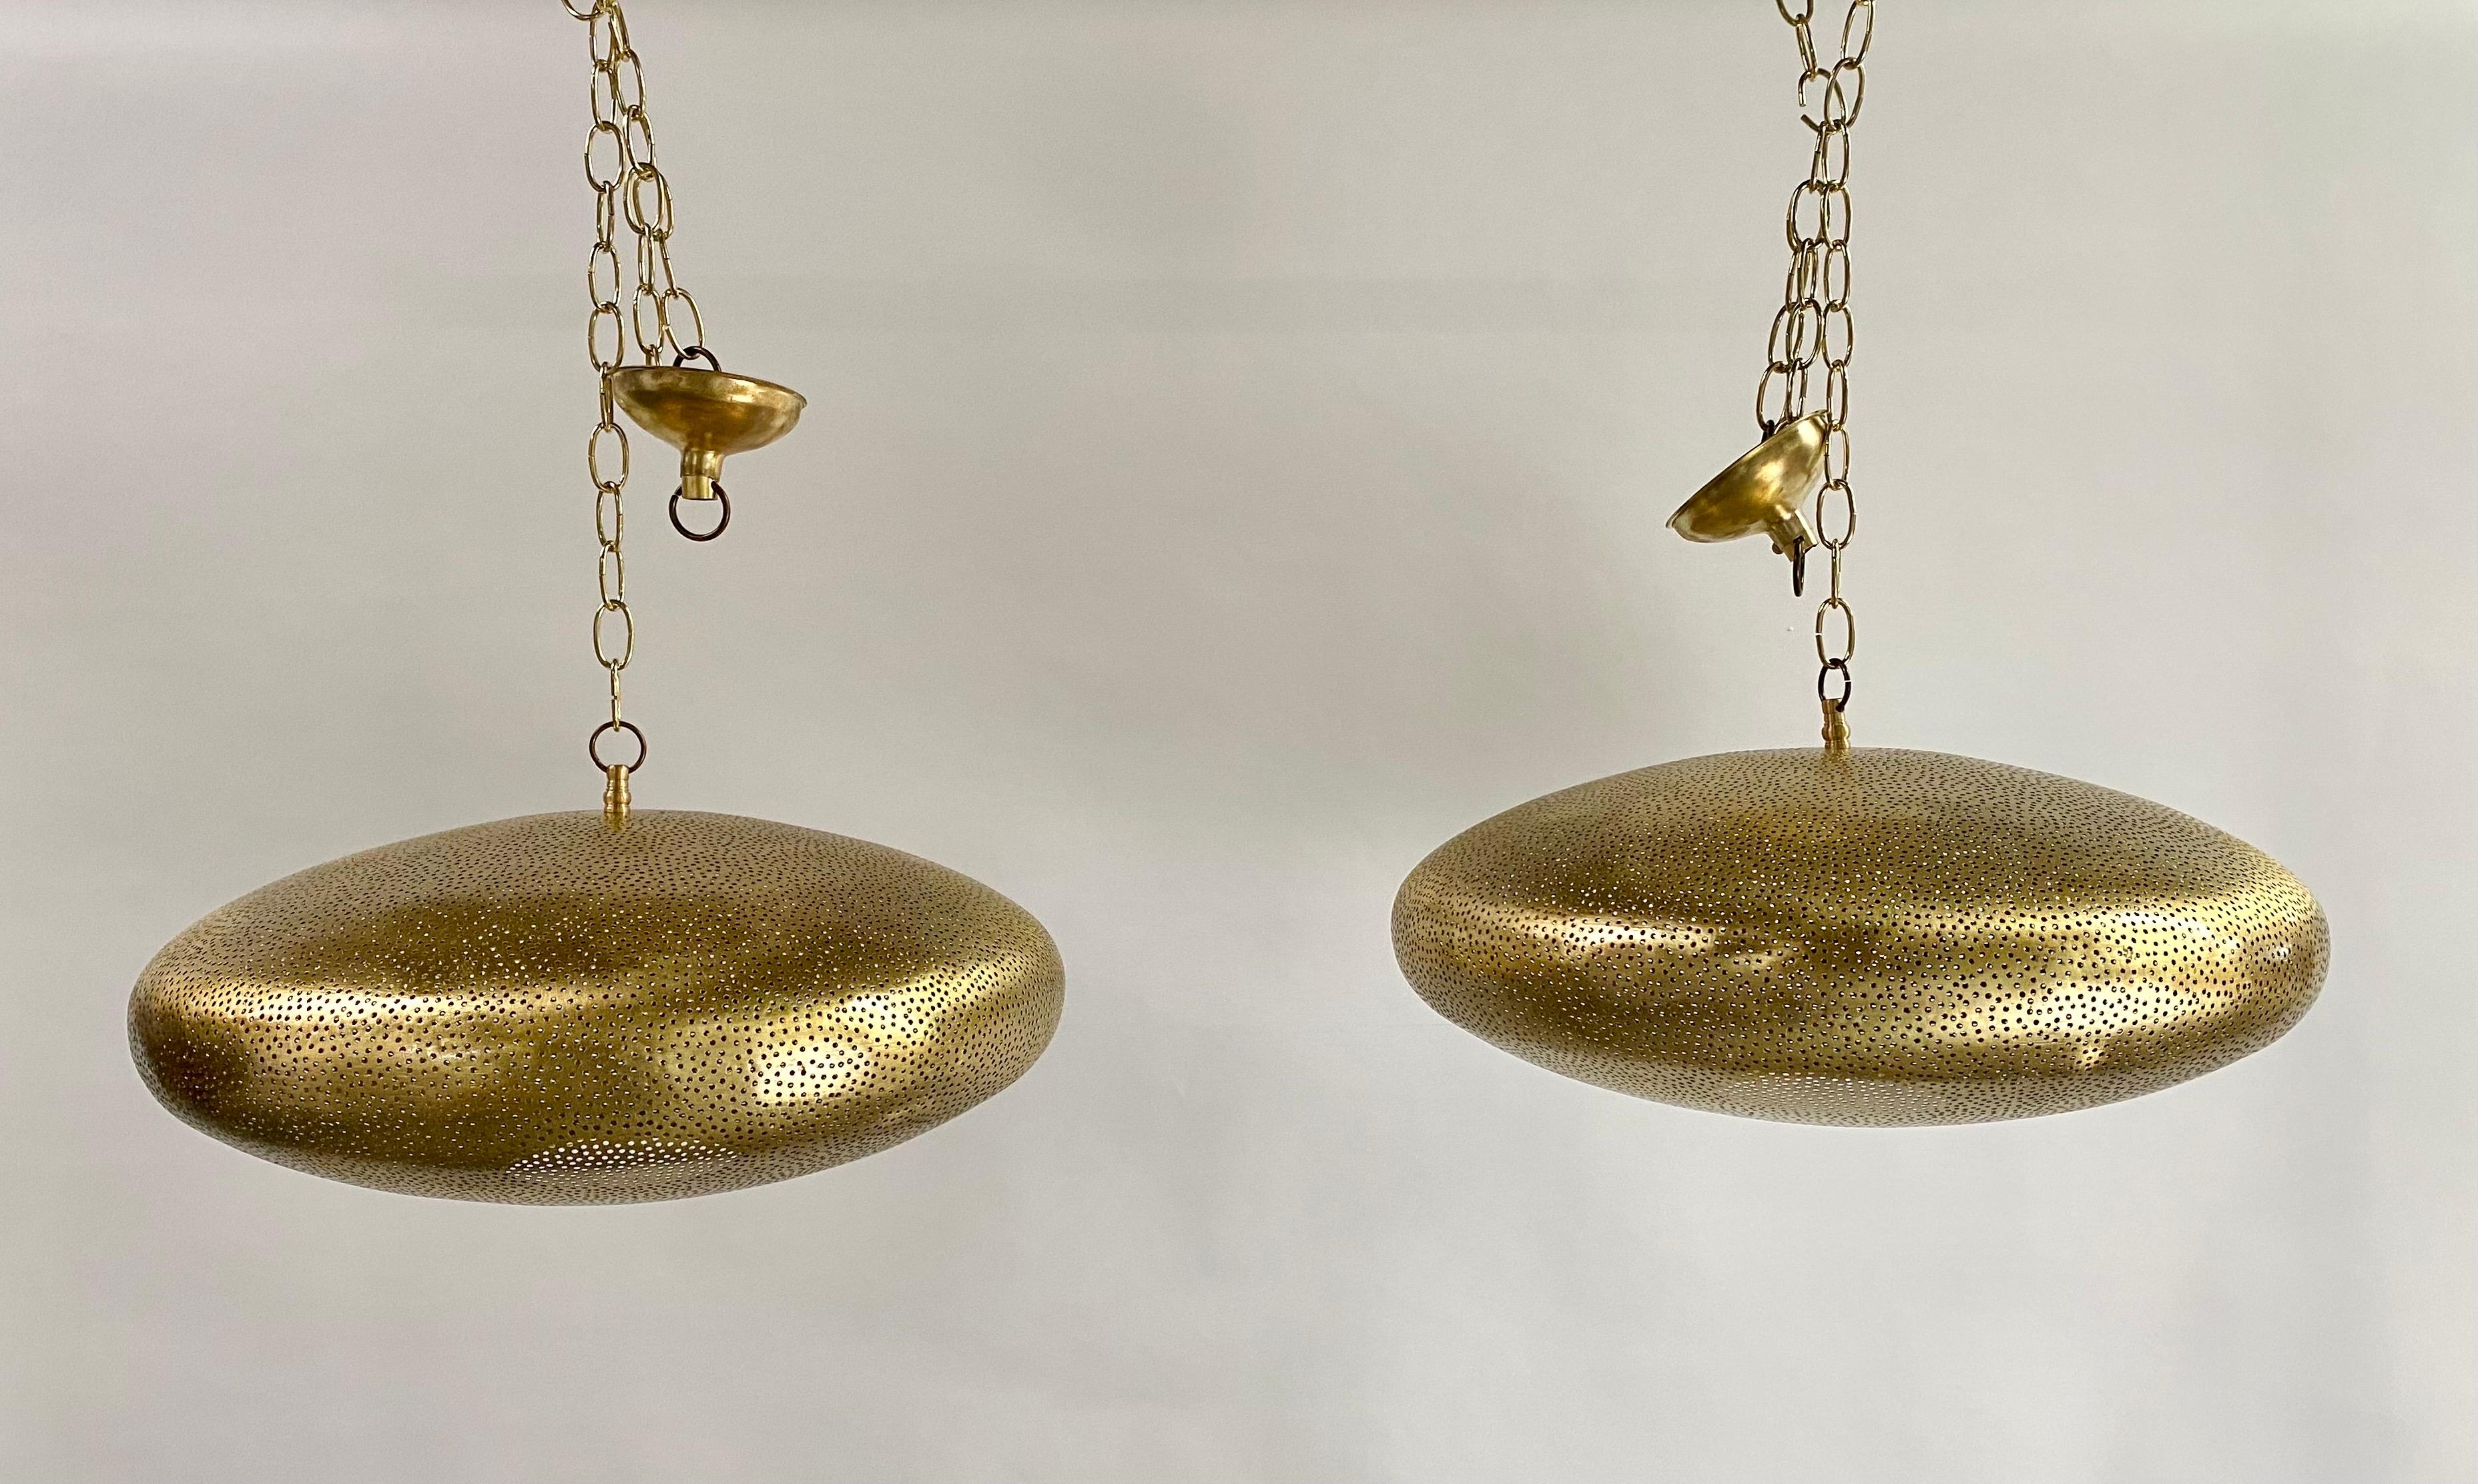 A pair of Mid- century Modern style all brass pendants or lanterns. Featuring a spaceship oval shape, these stylish pair of pendants are handmade of high quality brass and finely hand-tooled producing a soft ambient lighting perfect to elevate the